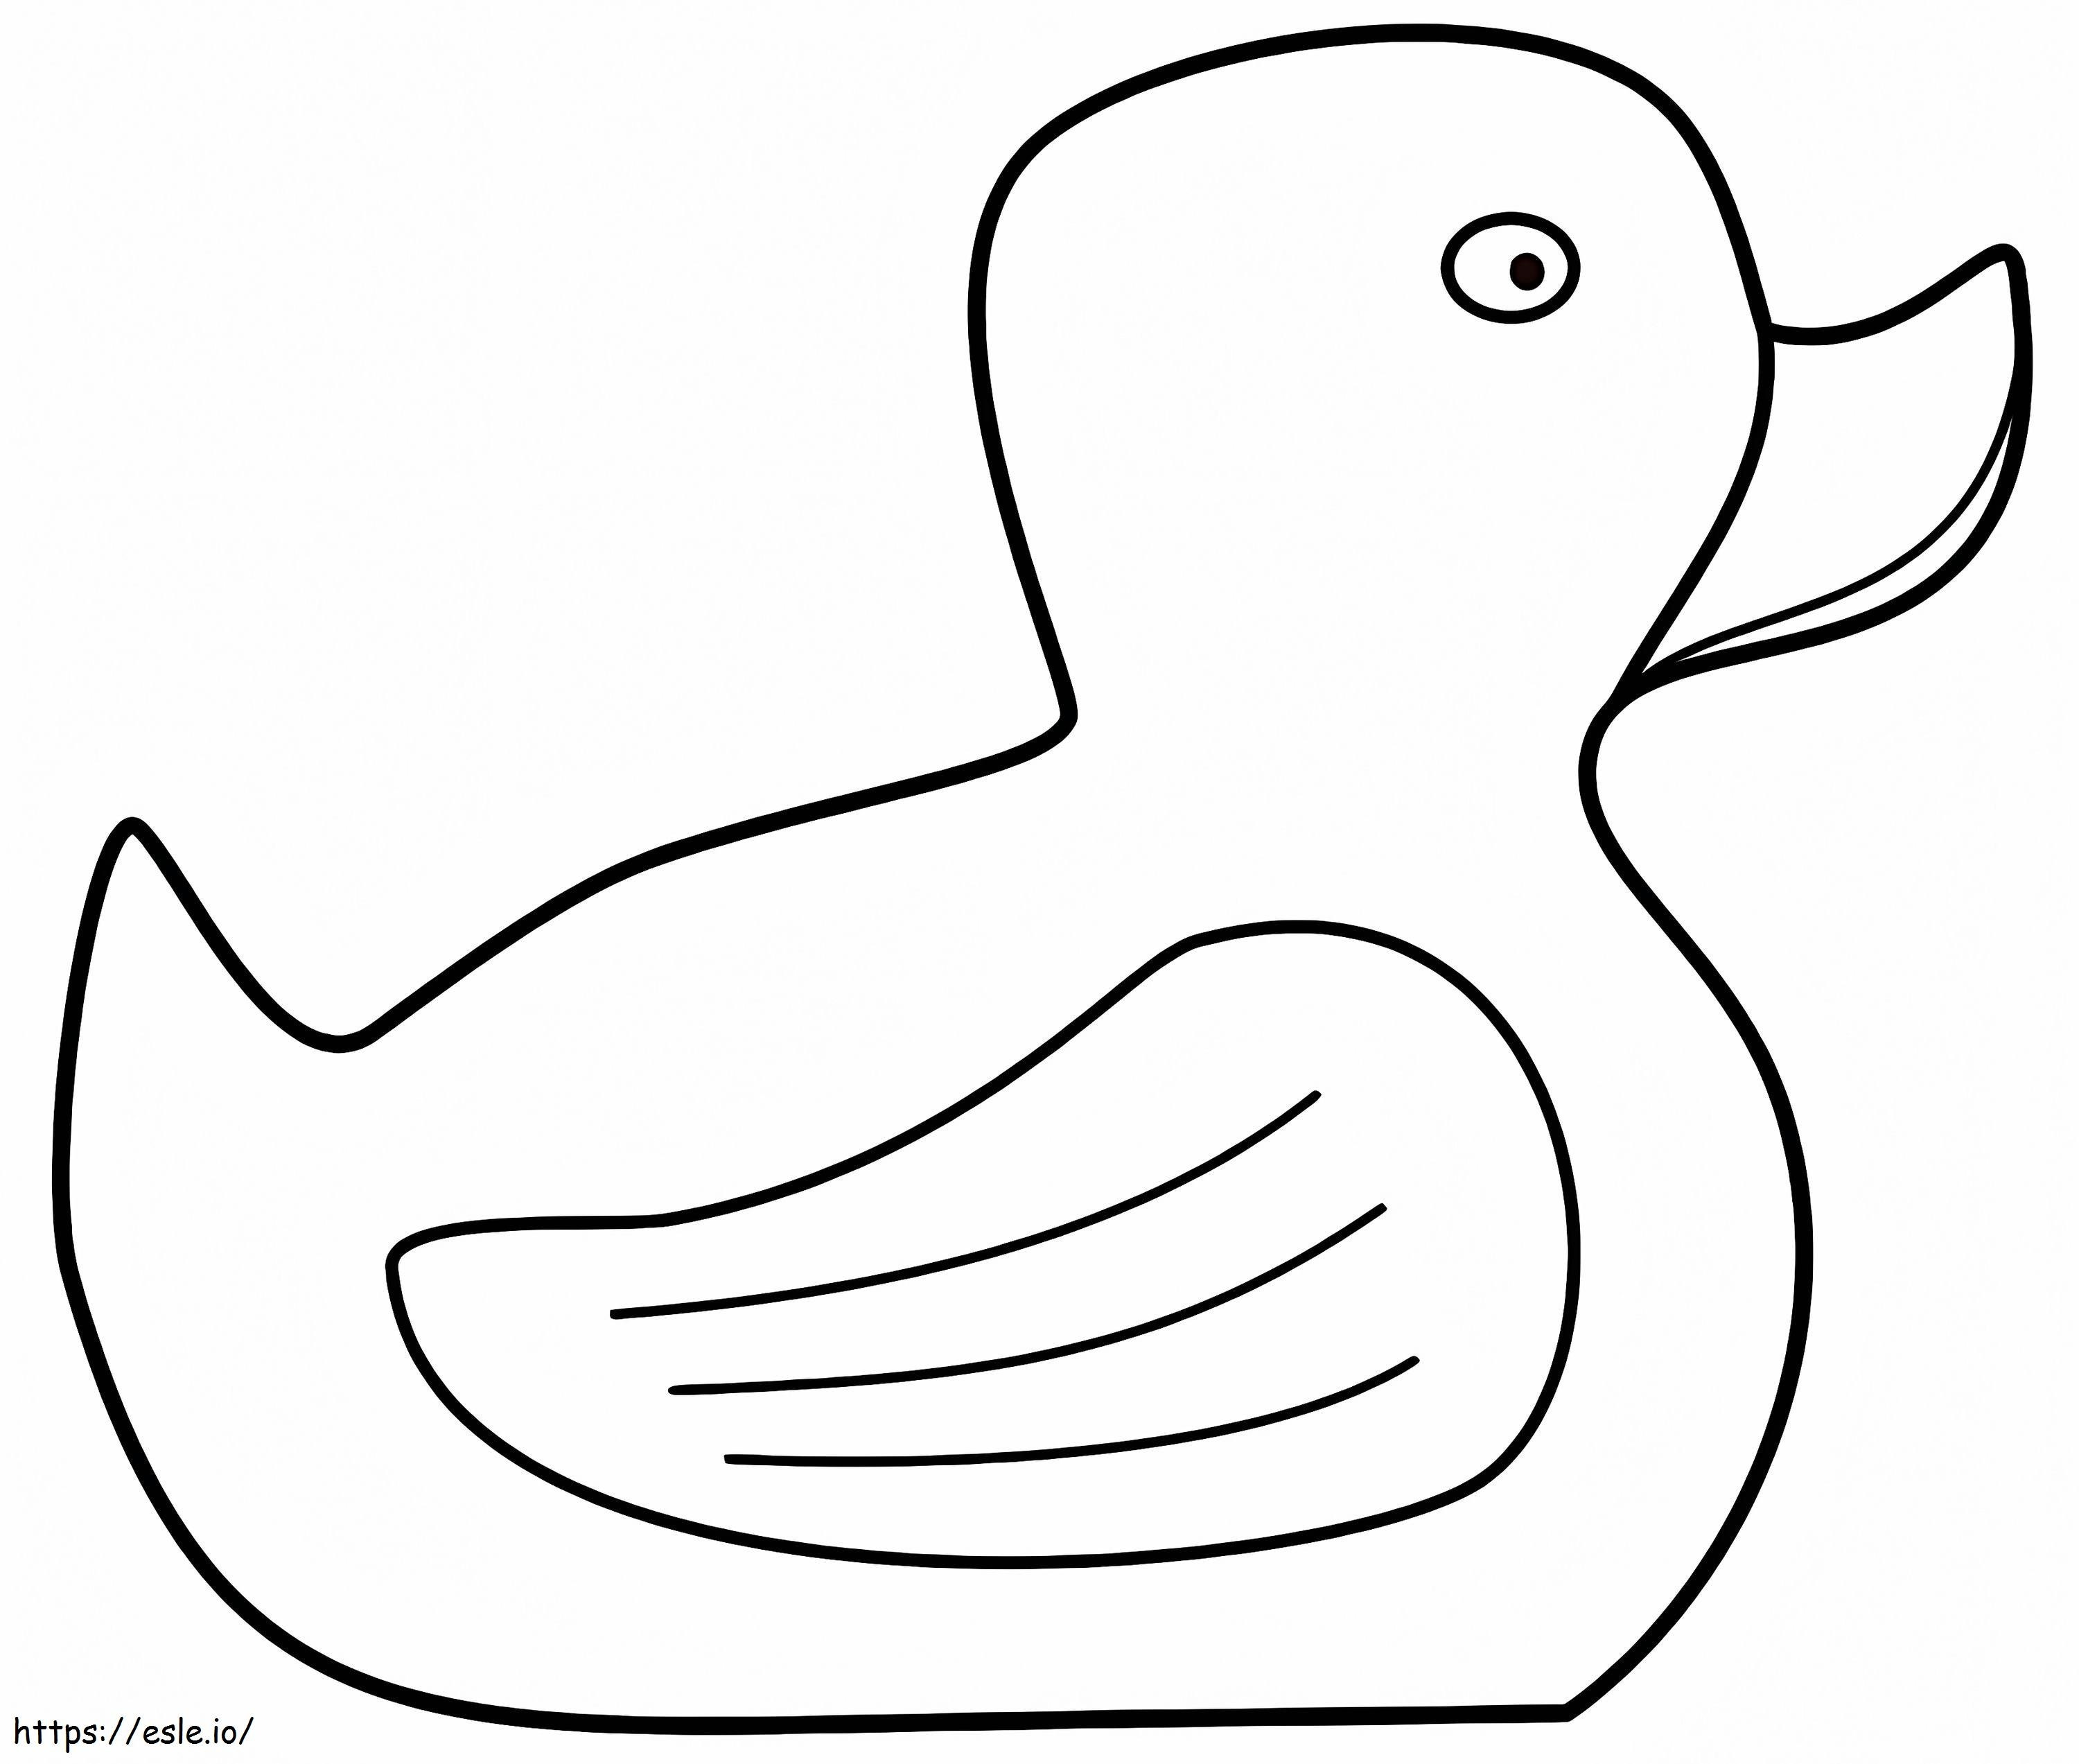 A Rubber Duck coloring page